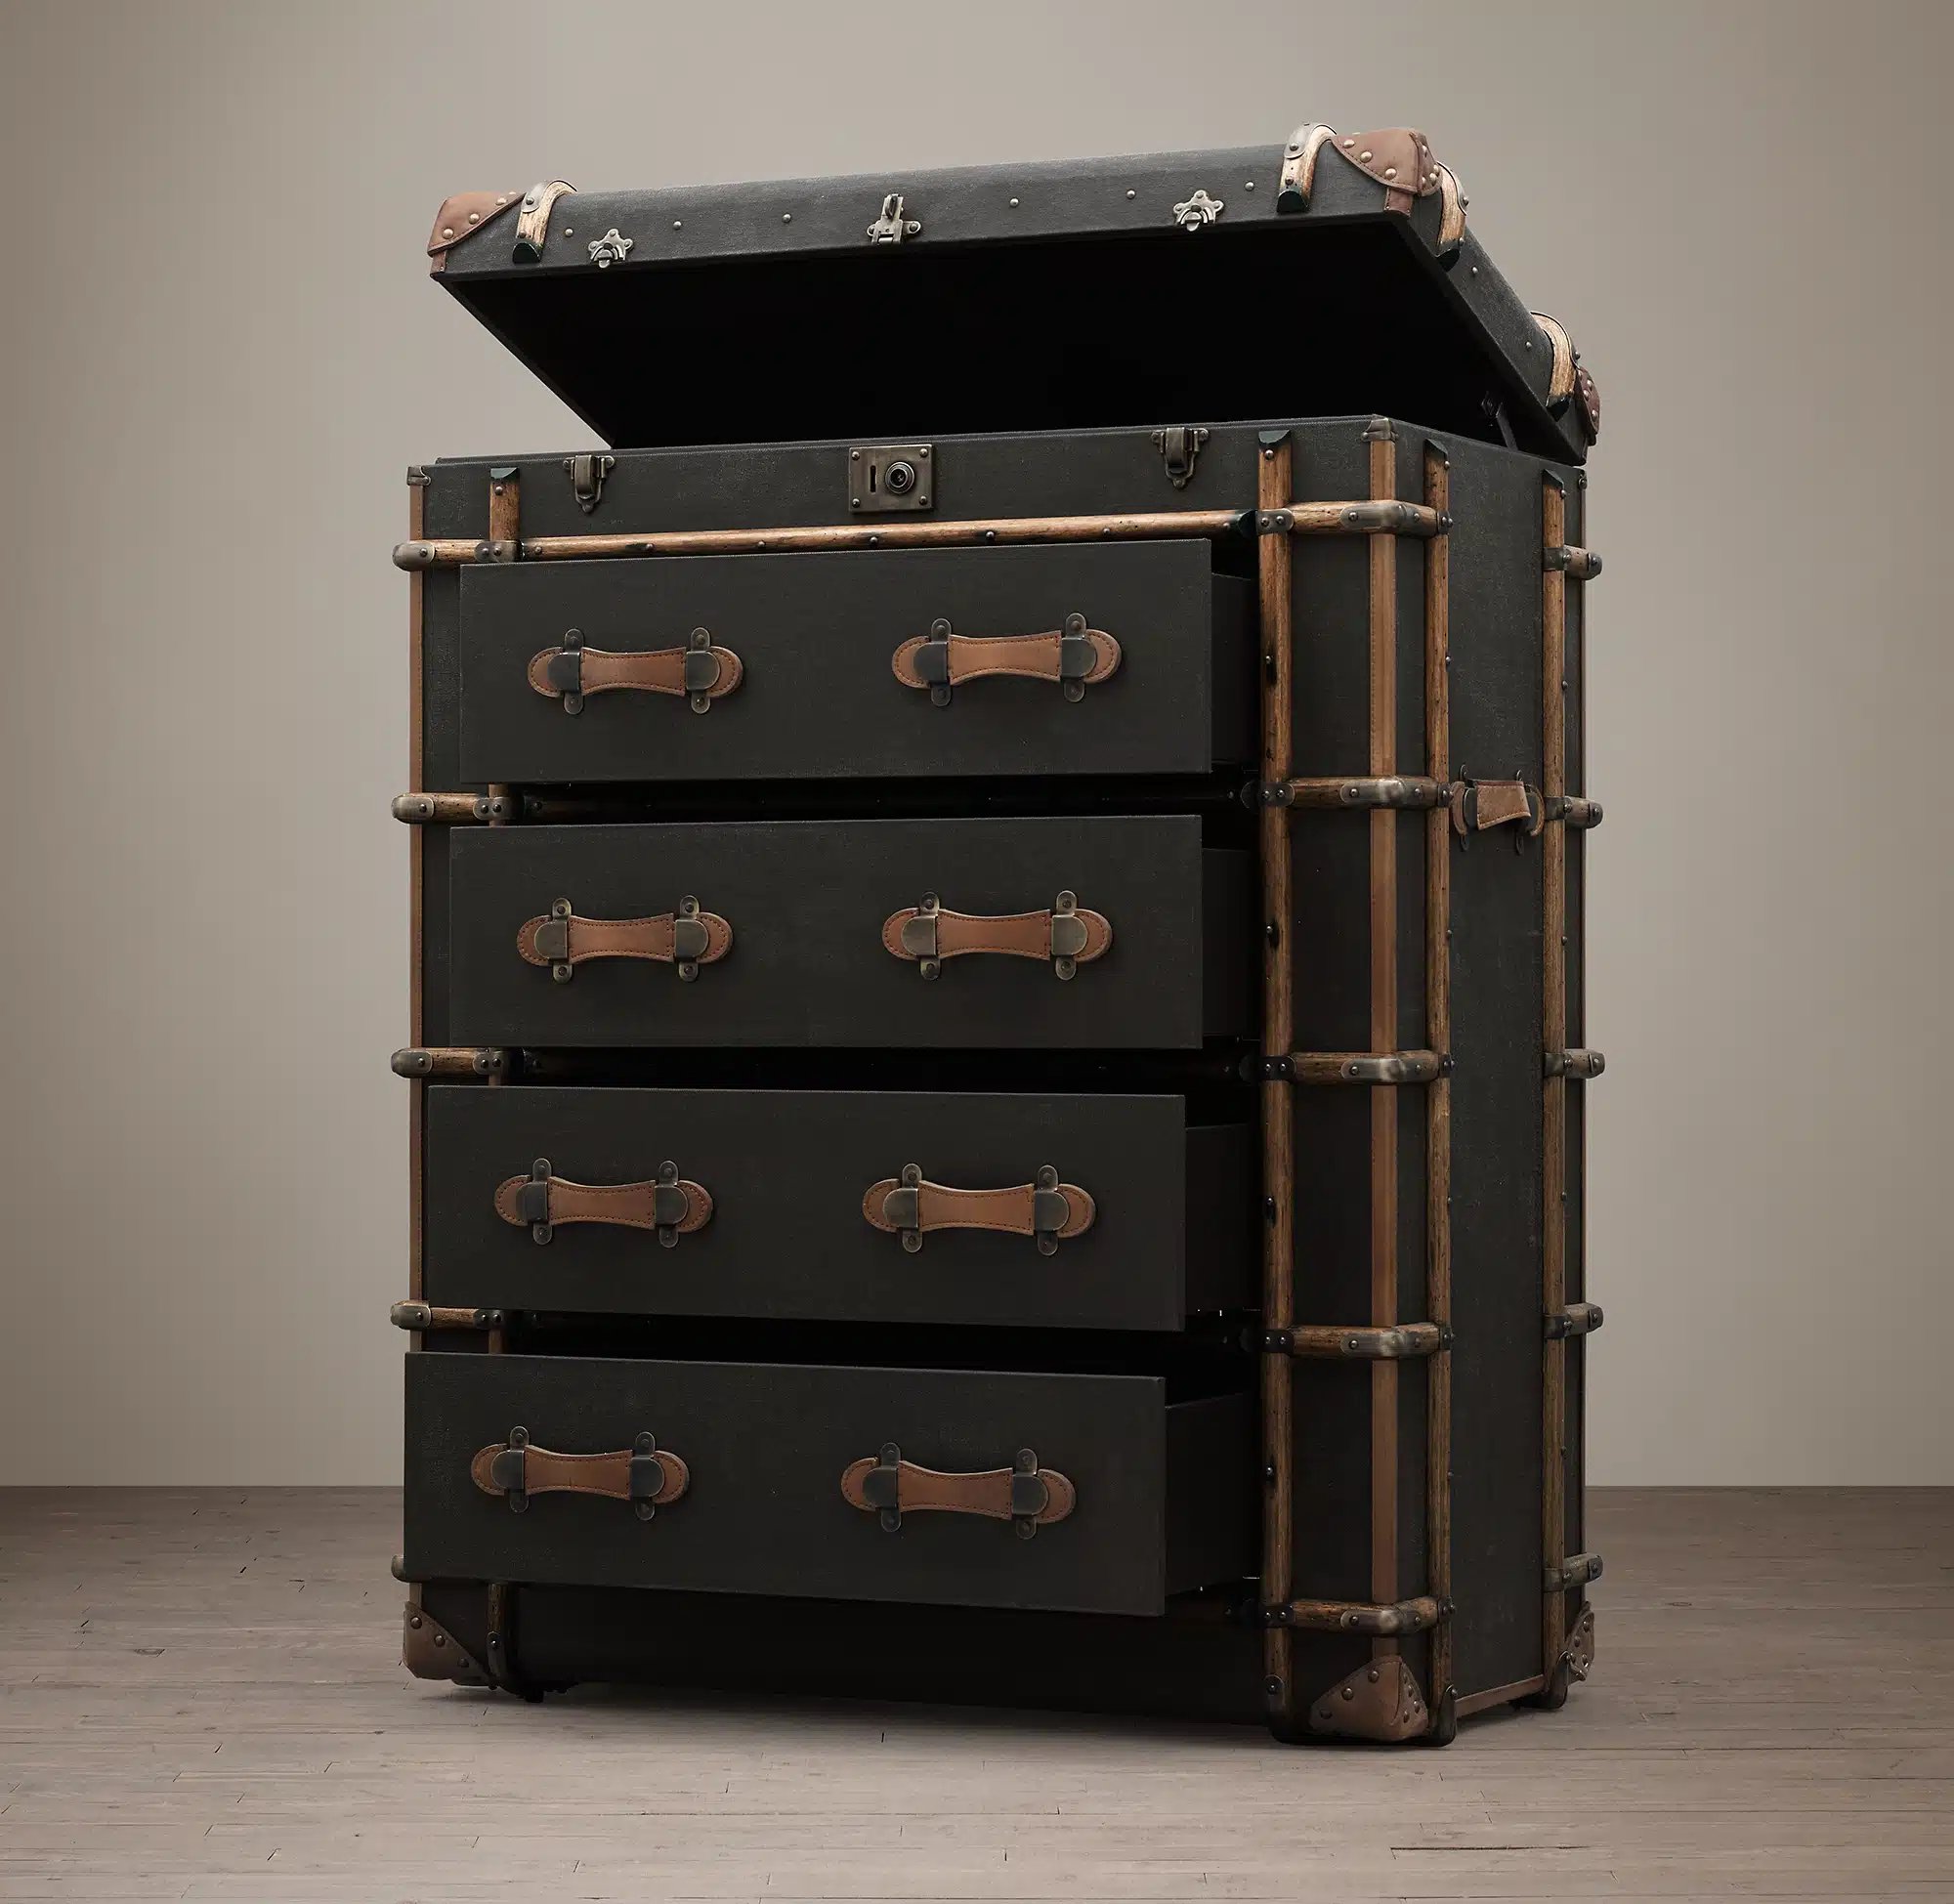 This Richards' Trunk chest measures 125 height x 90 width x 55 depth cm.